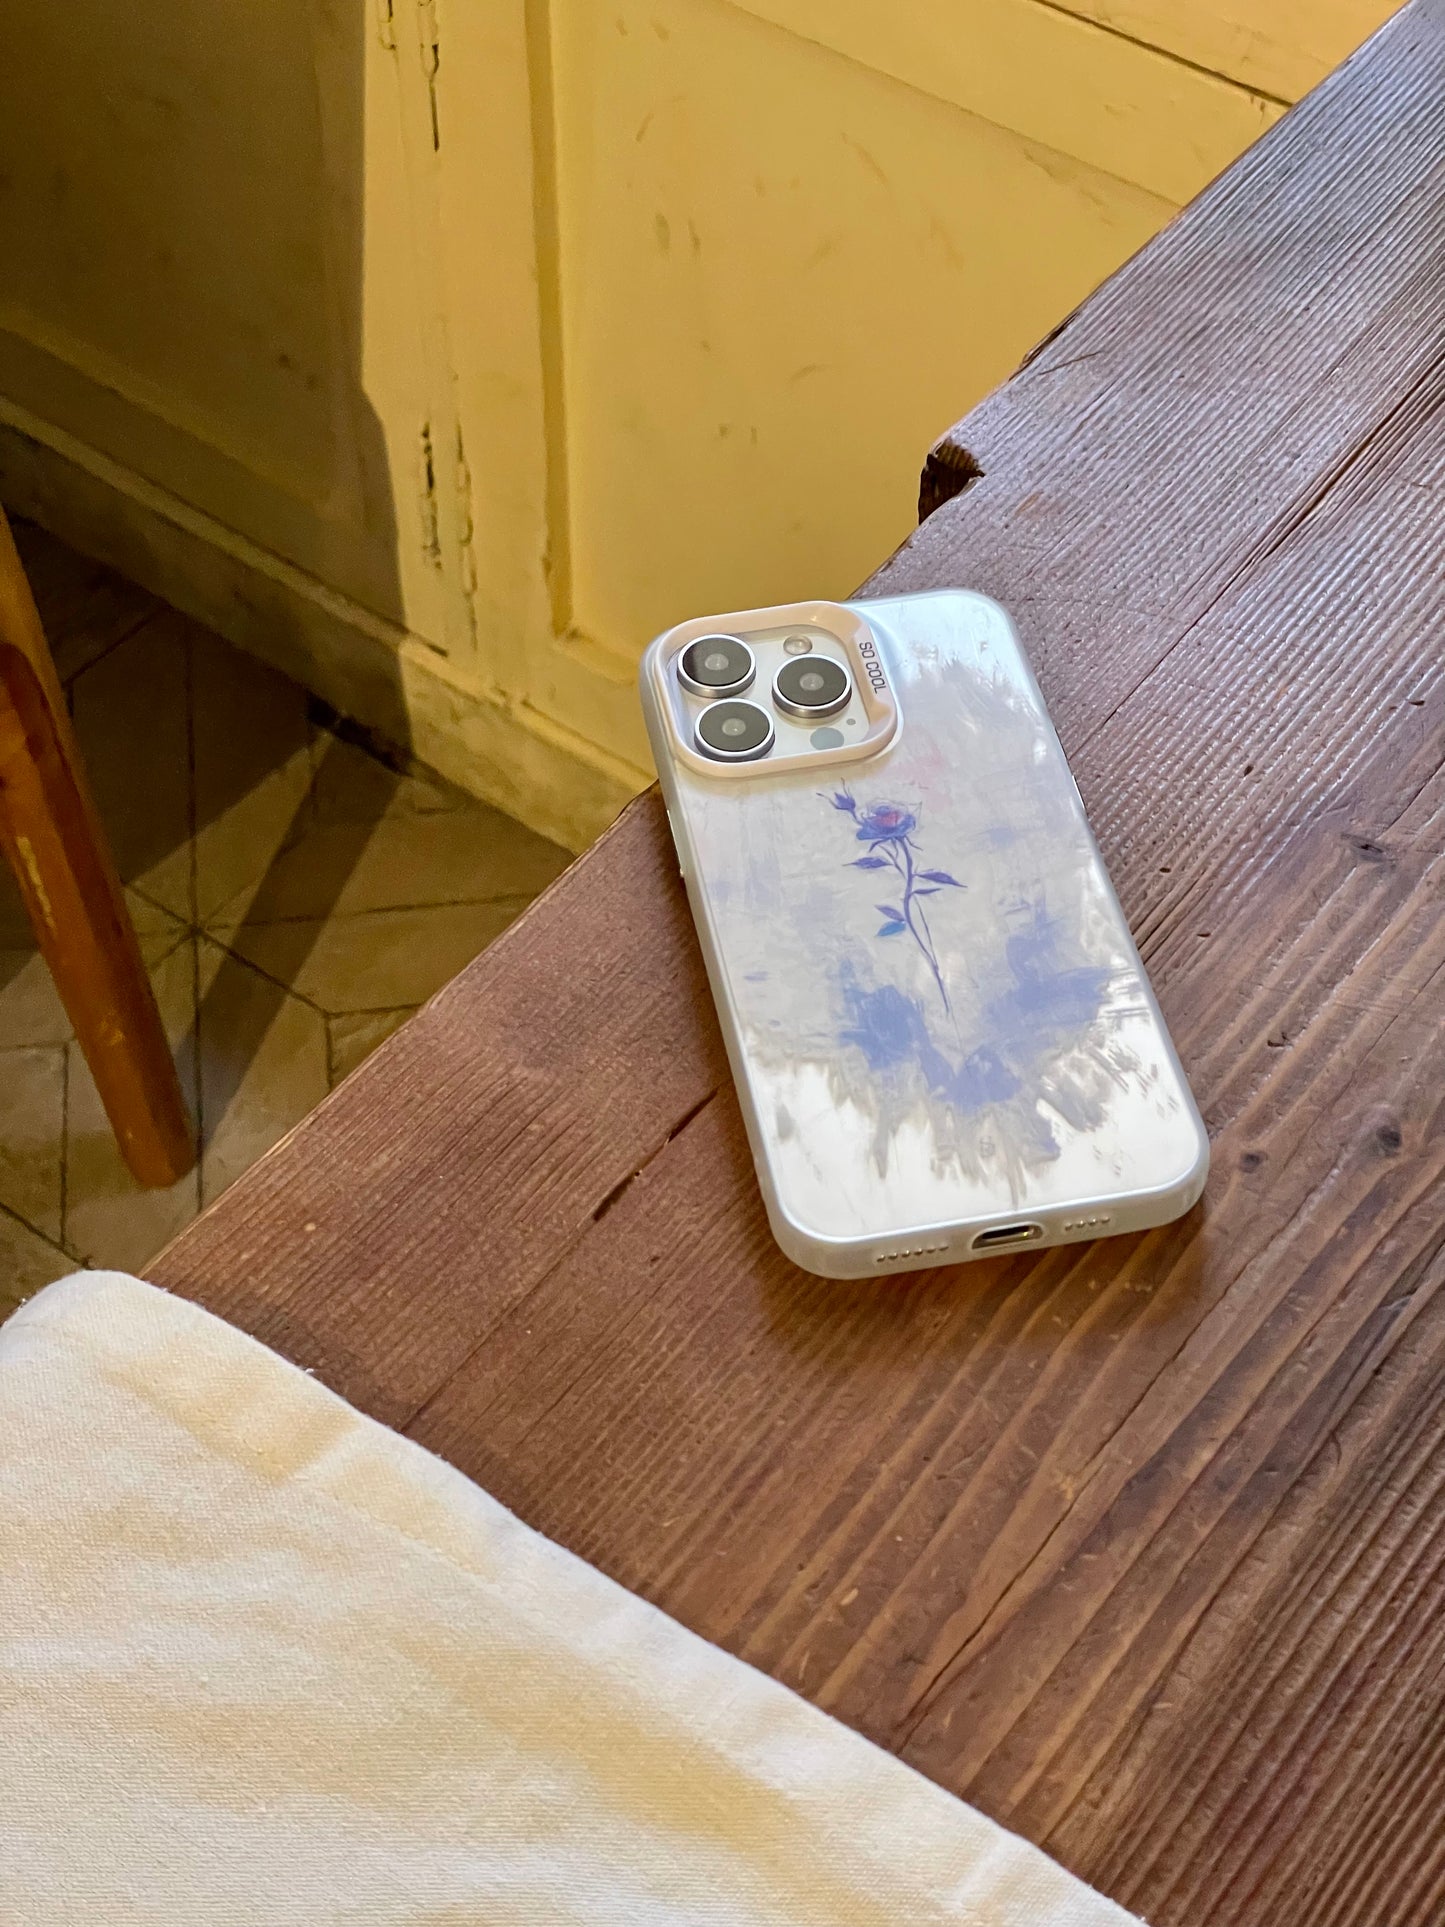 Rose's Solo Dance Printed Phone Case